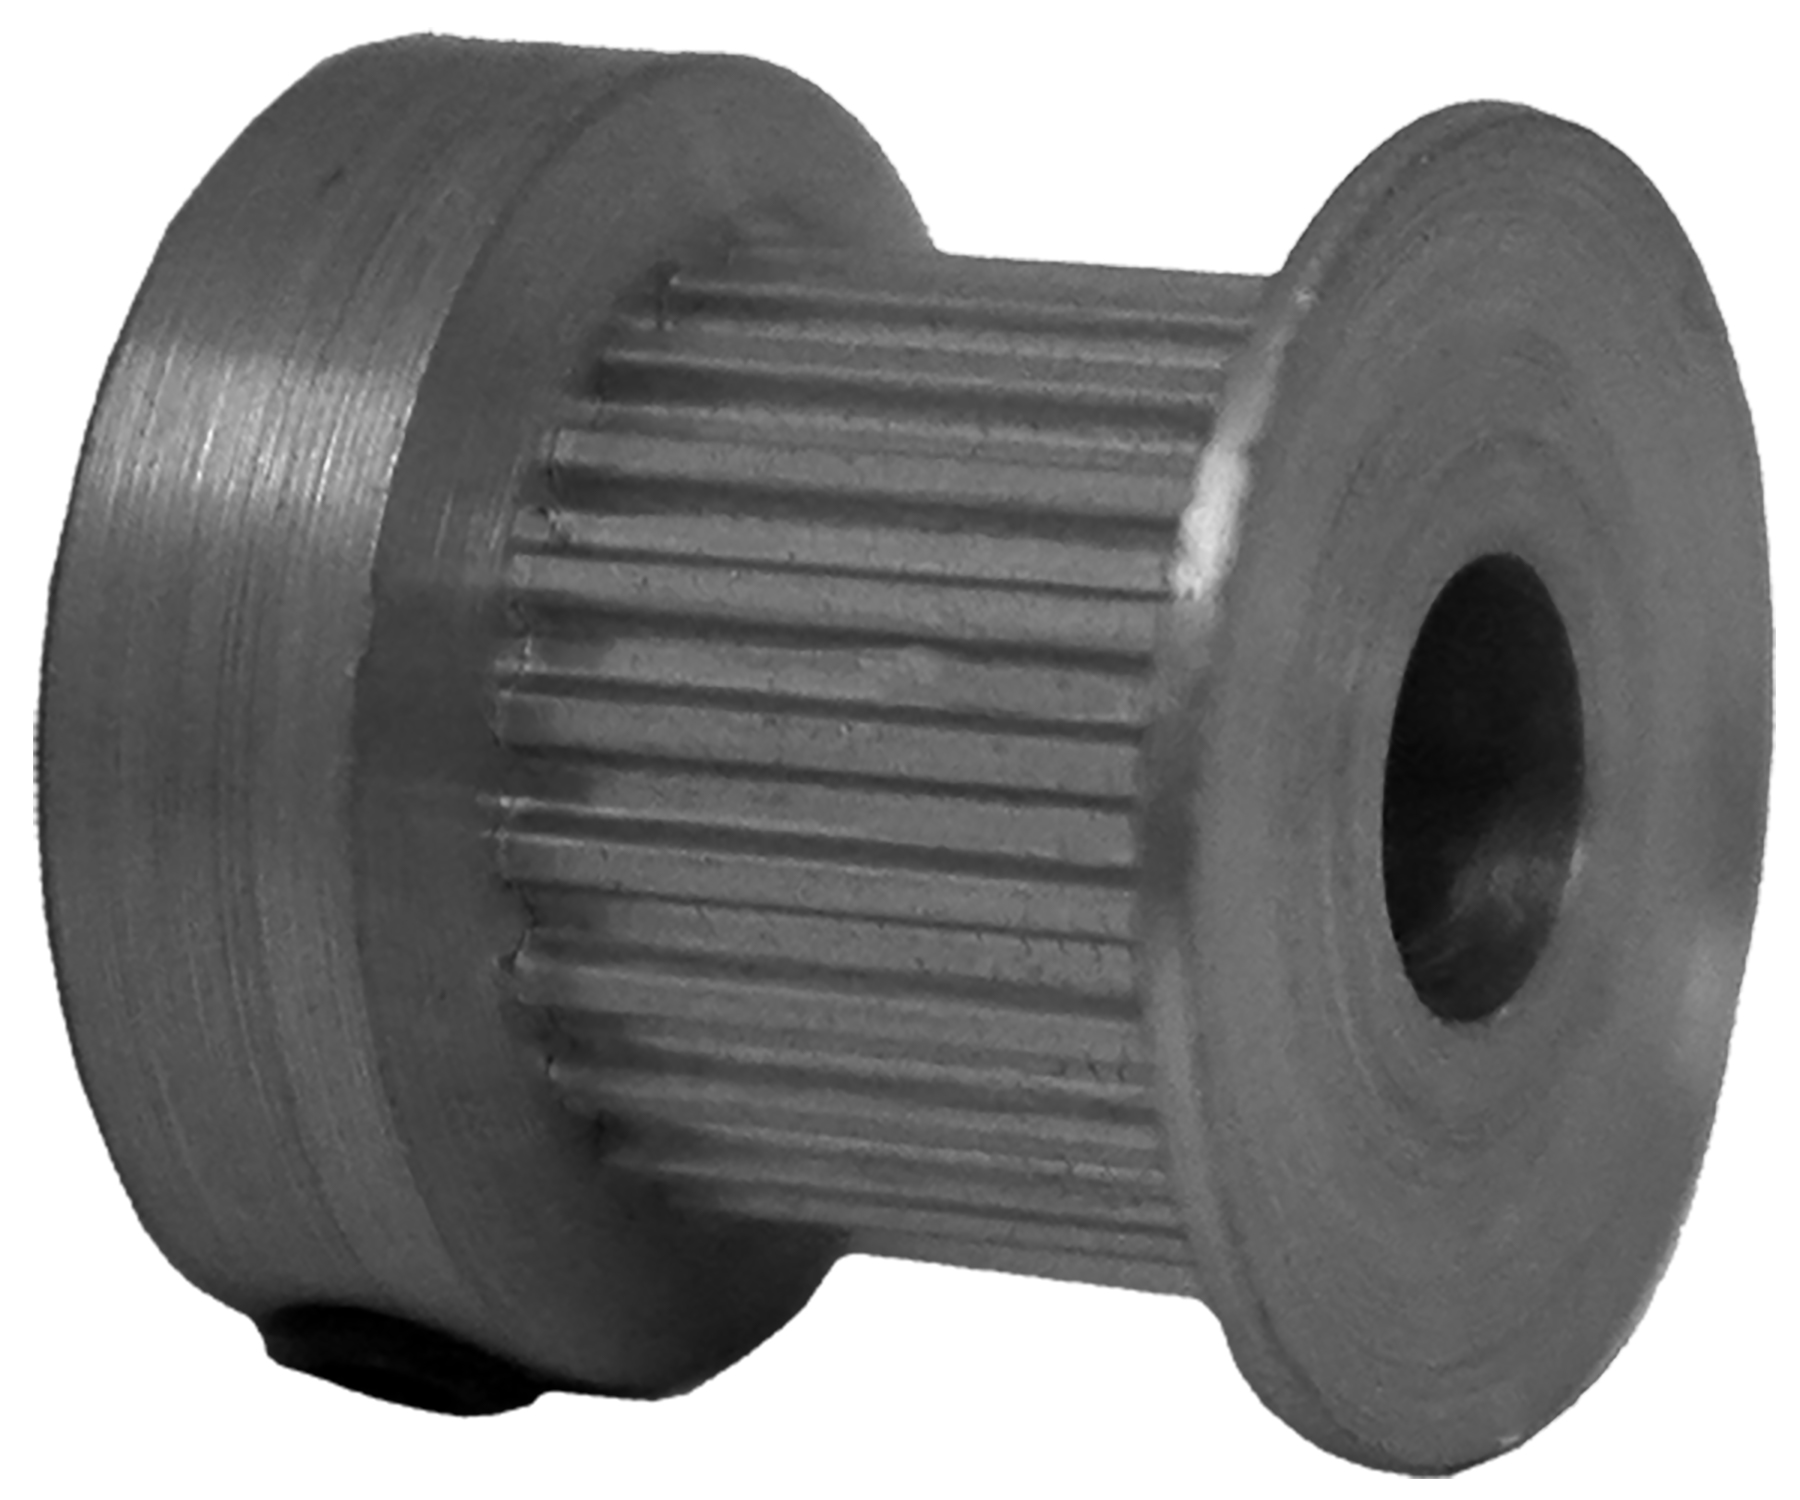 22MP037-6CA3 - Aluminum Imperial Pitch Pulleys